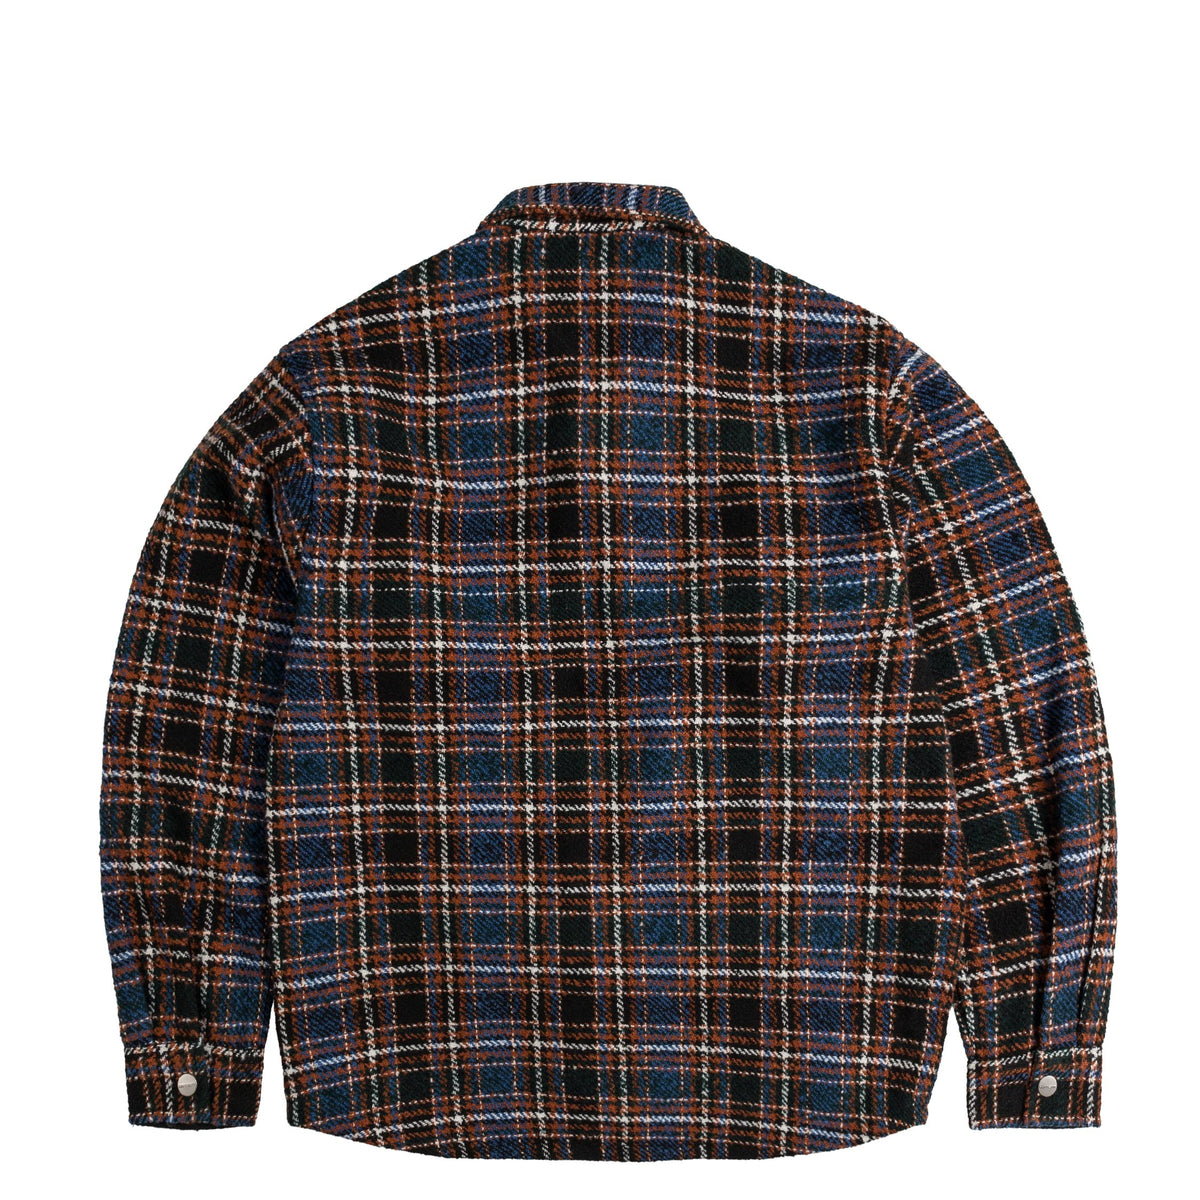 Carhartt WIP Stroy Shirt Jacket – buy now at Asphaltgold Online Store!